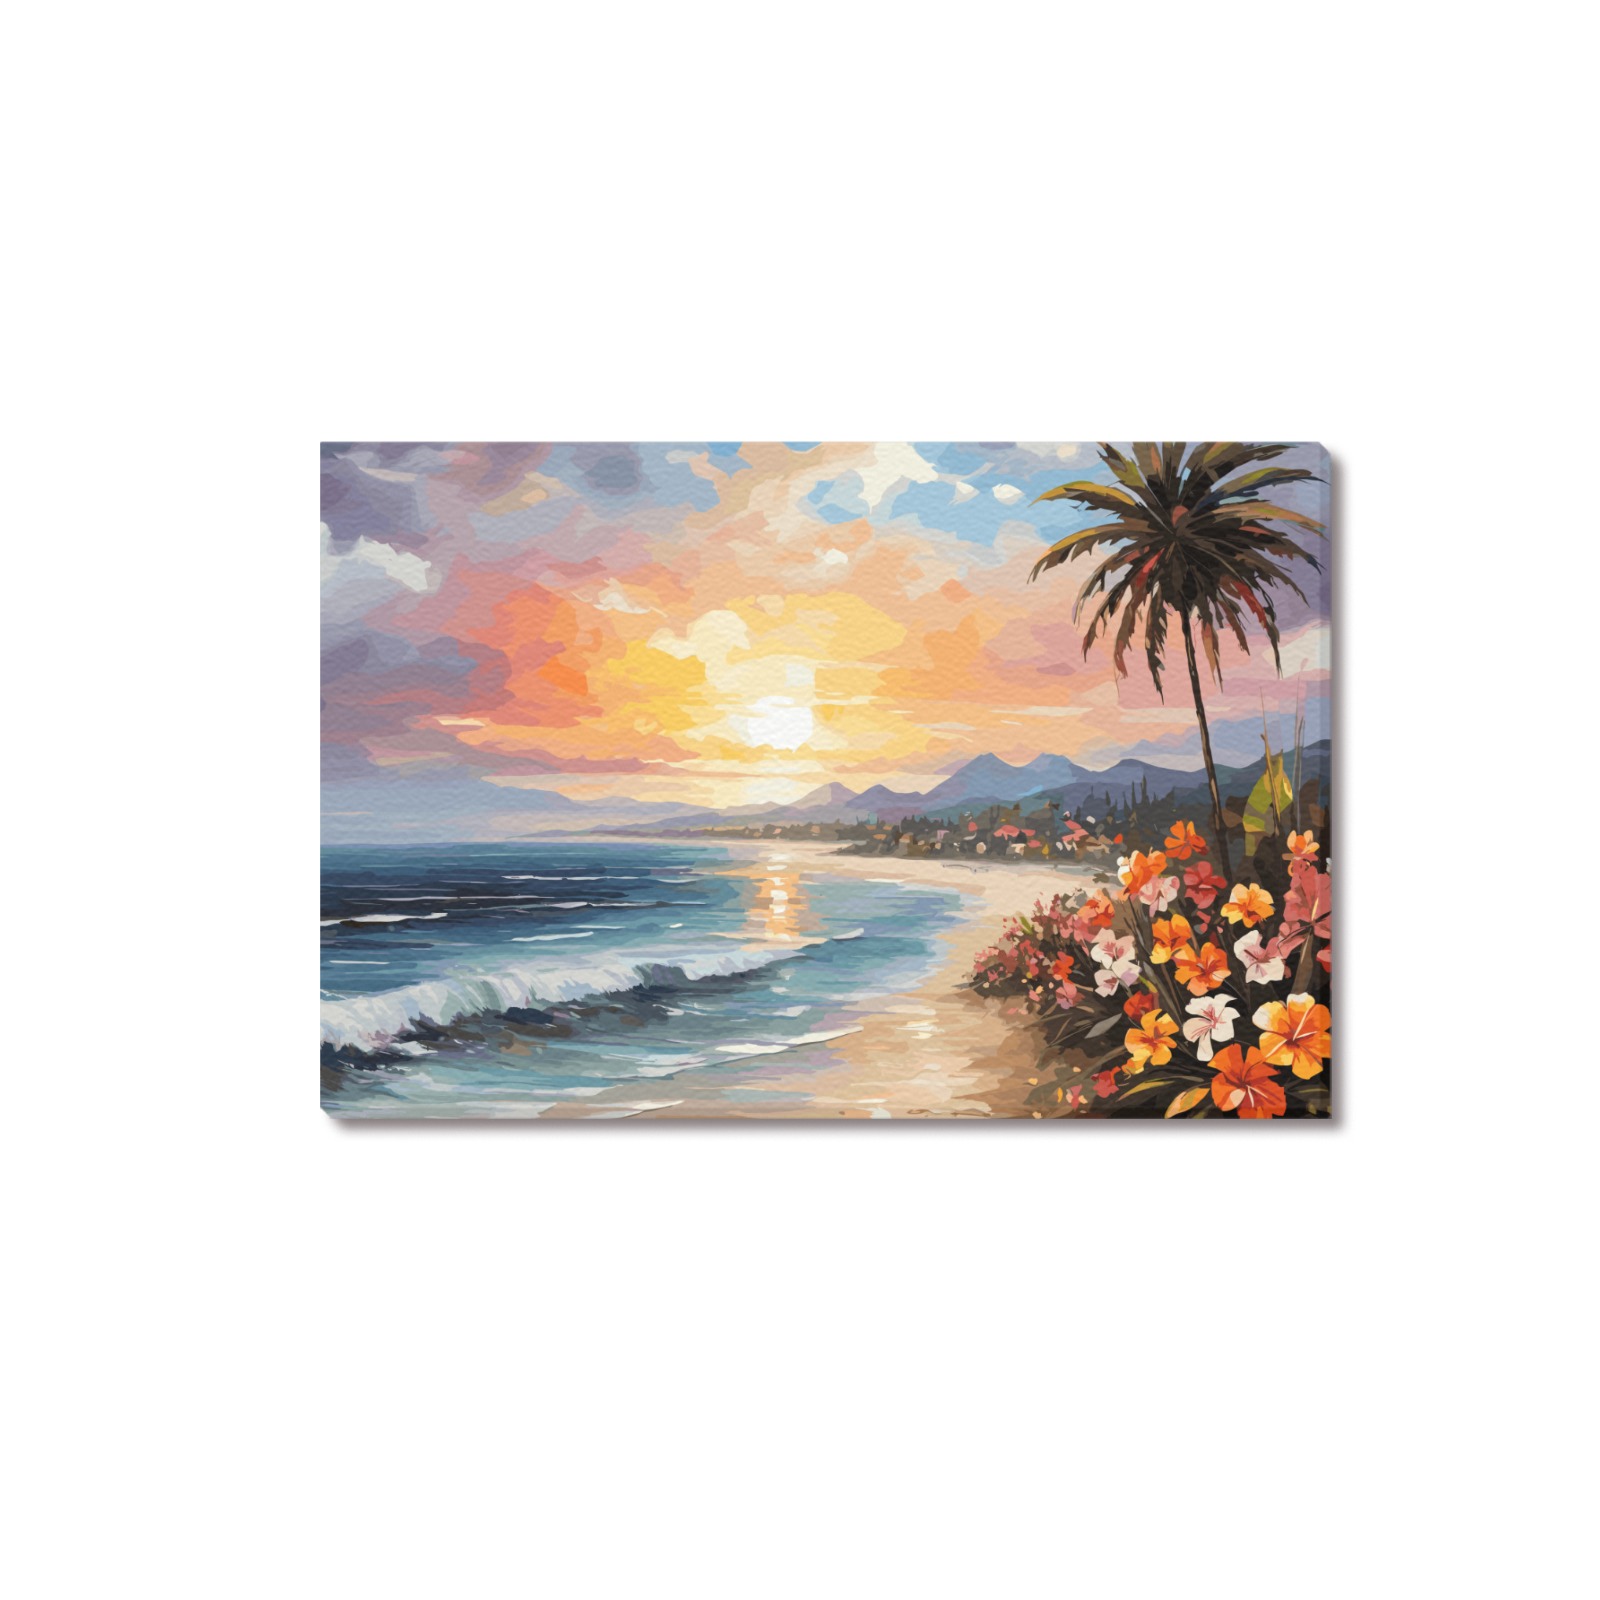 Beautiful calm sunset over the tropical island. Upgraded Canvas Print 18"x12"